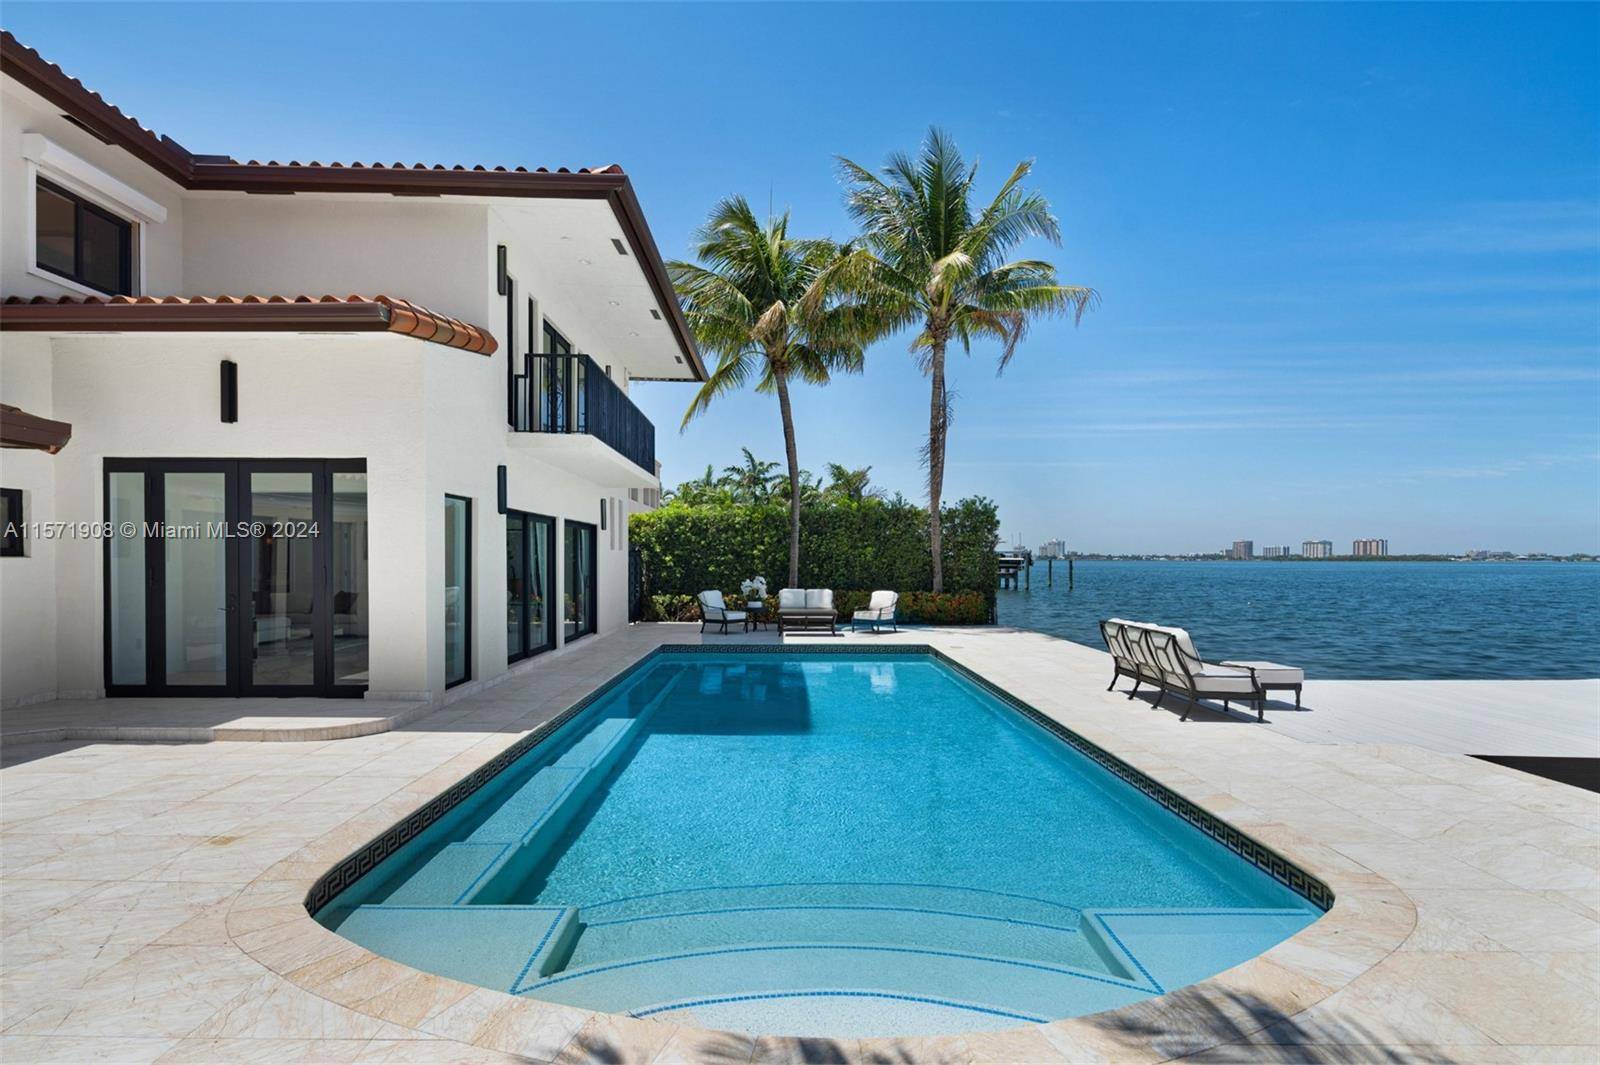 Step Inside With Me ! This Mediterranean abode in the beloved Biscayne Point offers open bay views in this gated neighborhood.